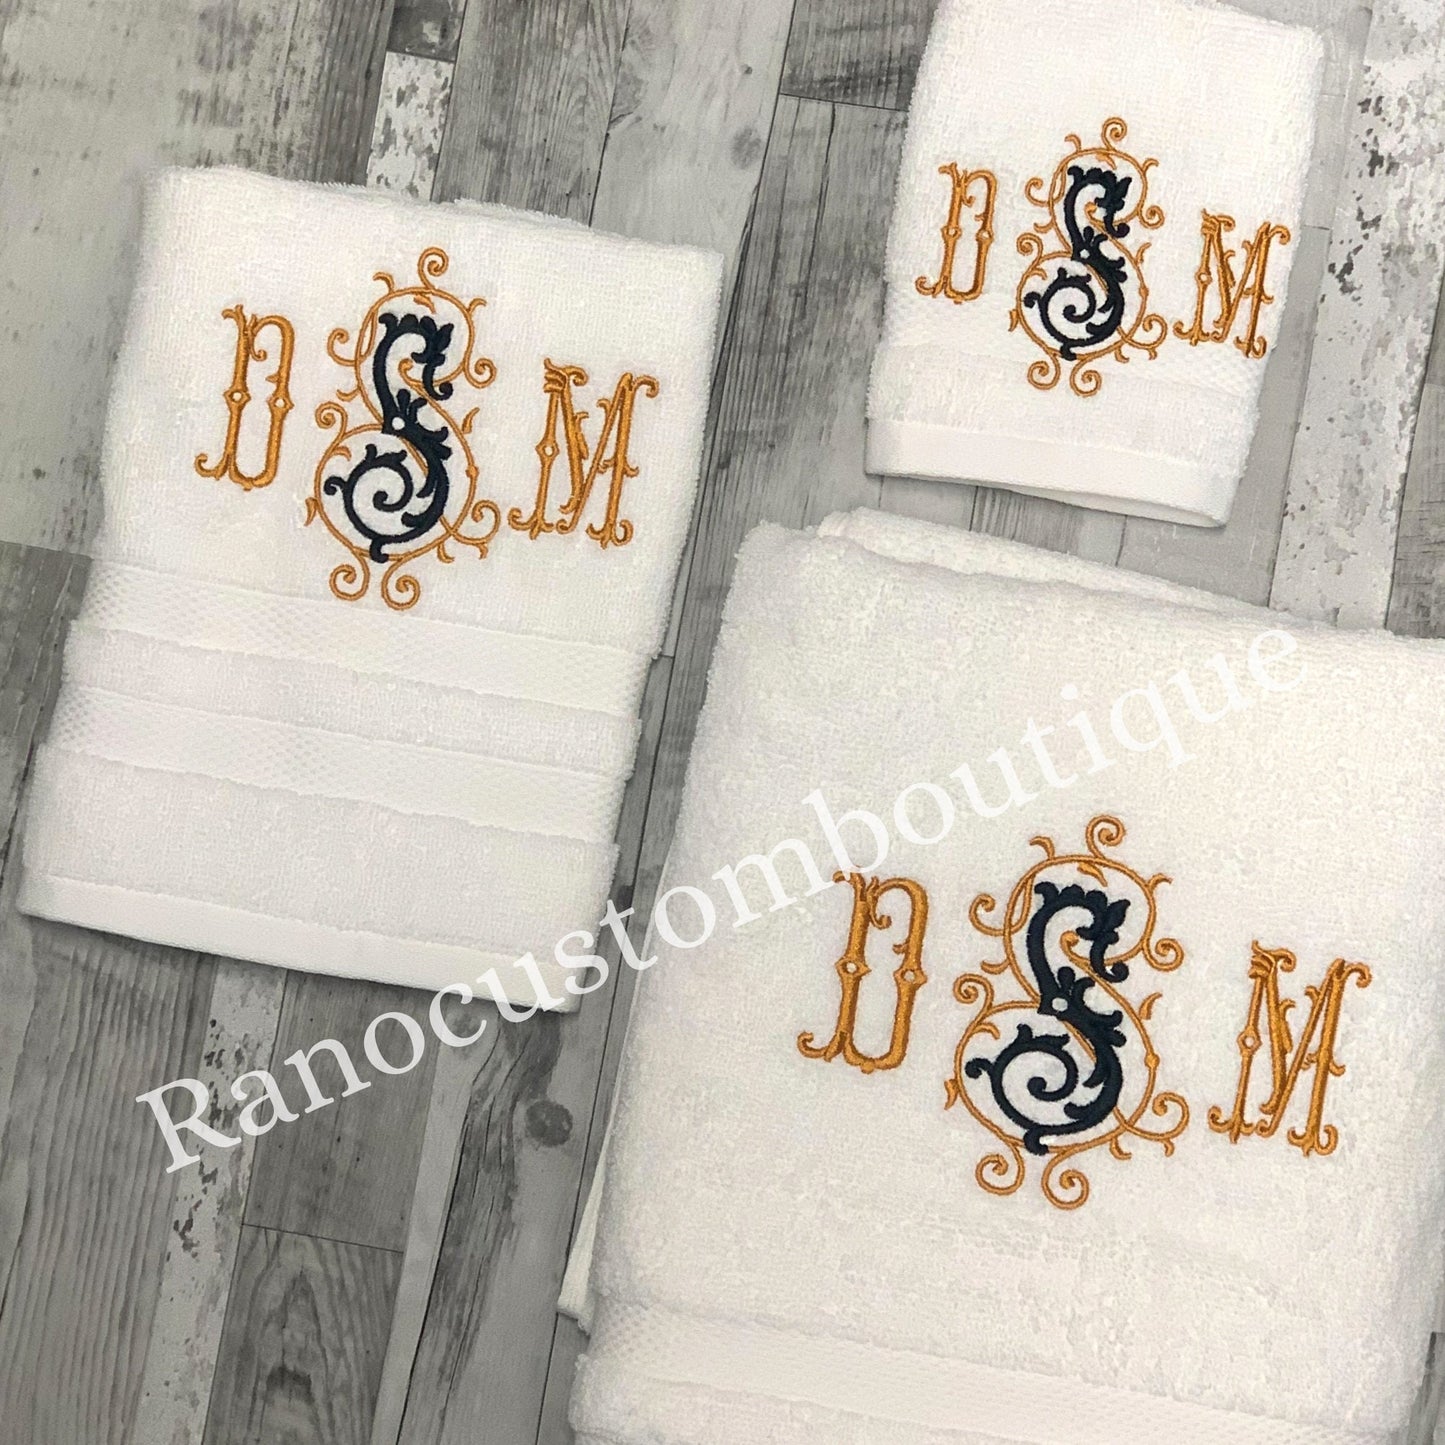 Personalized Face/Hand/Bath Towel, Embroidered Towel, Manoir Monogram Design, Monogrammed Towels